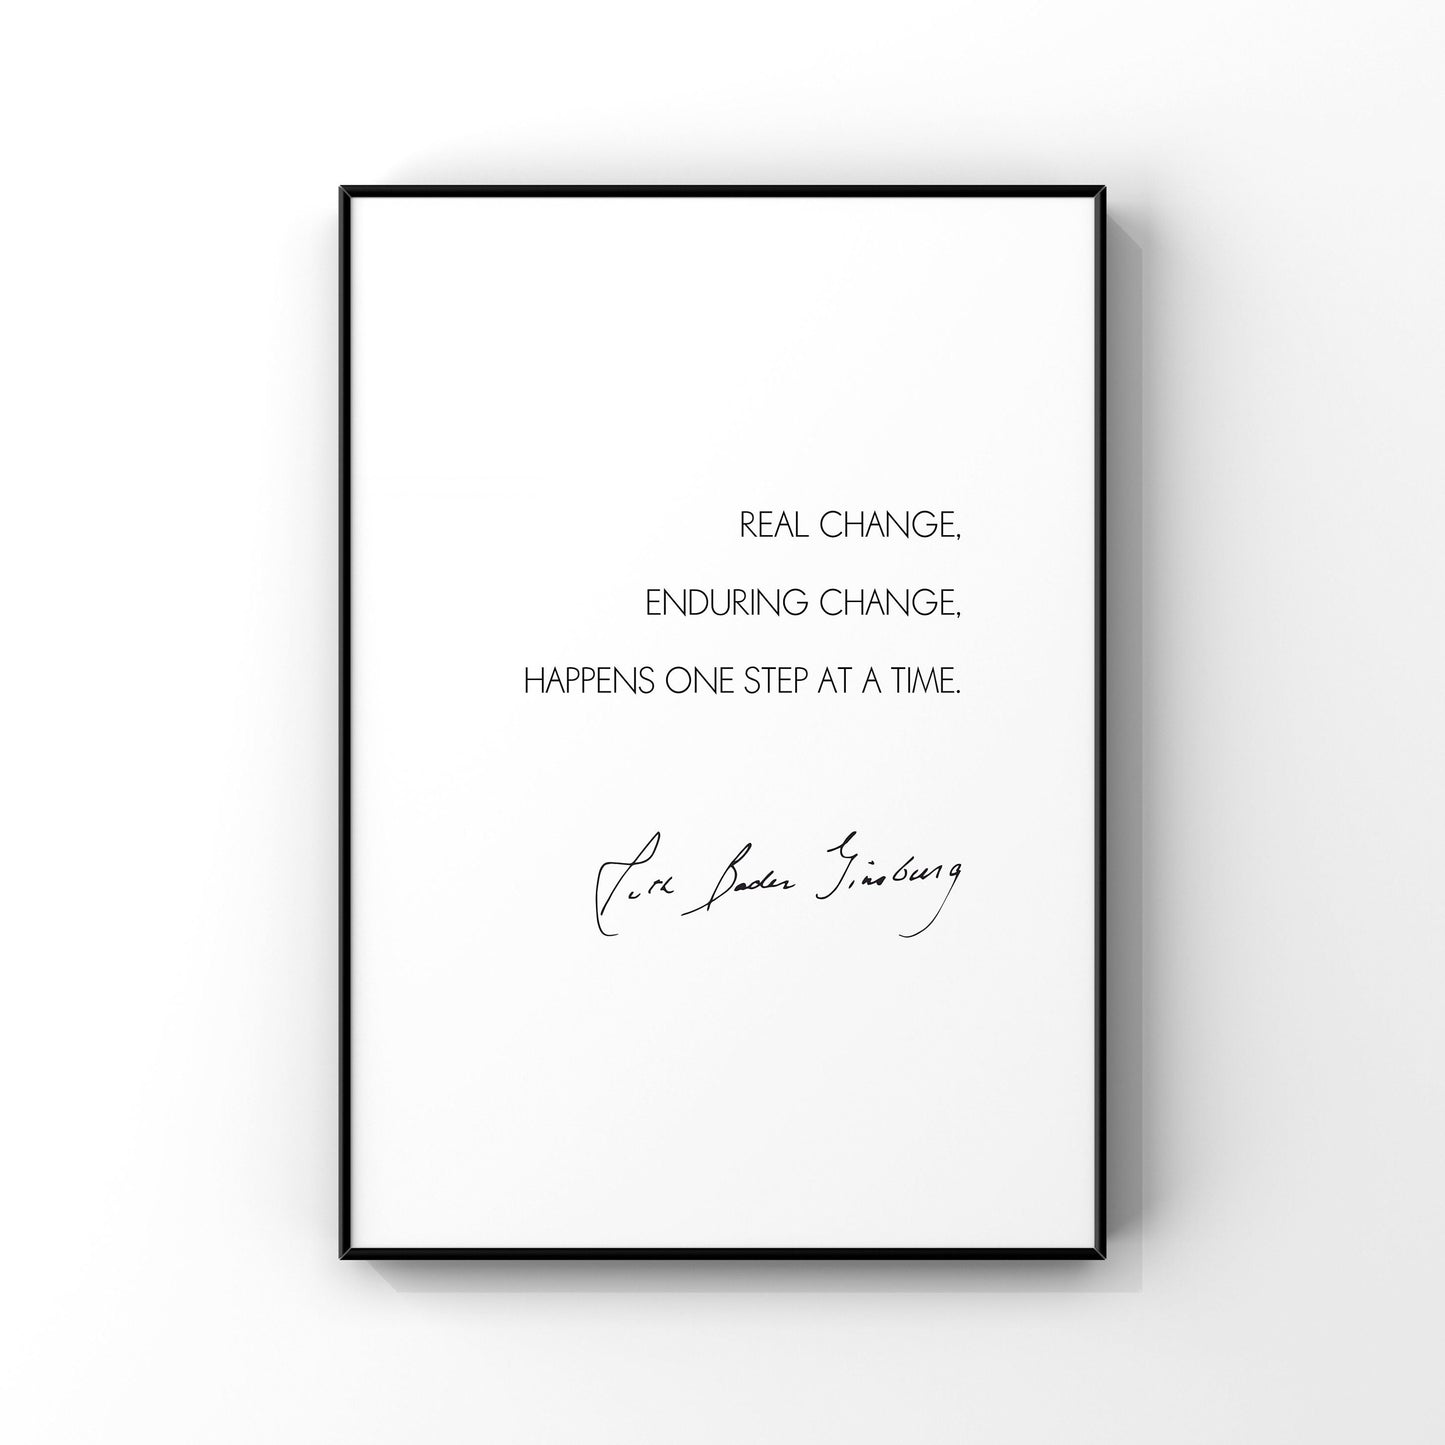 Real change enduring change happens one step at a time,Ruth Bader Ginsburg print,RBG quote,Inspirational print,Wall decor,RBG gift,Encourage